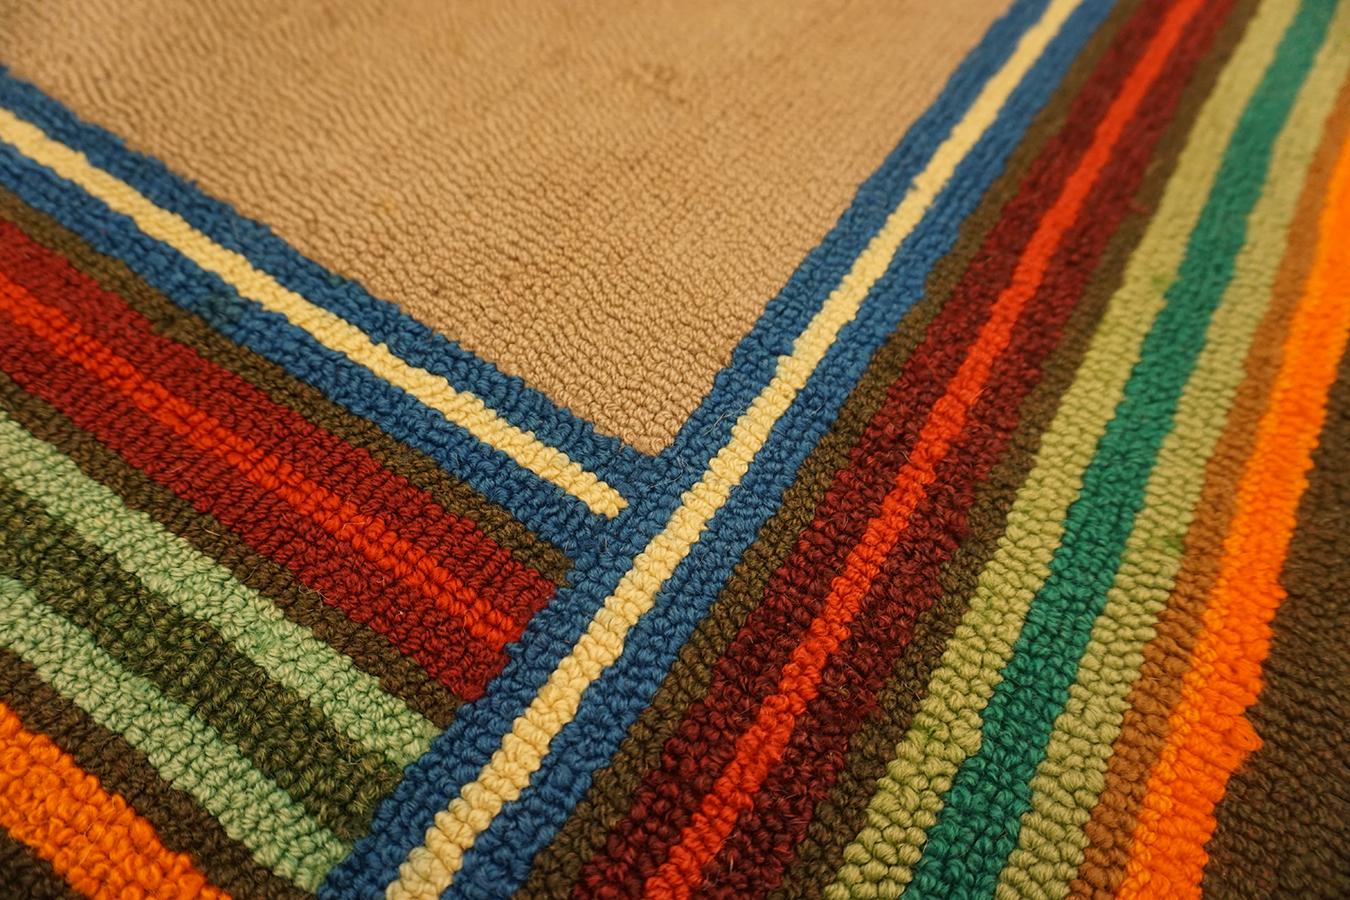 Mid 20th Century American Hooked Rug  In Good Condition For Sale In New York, NY